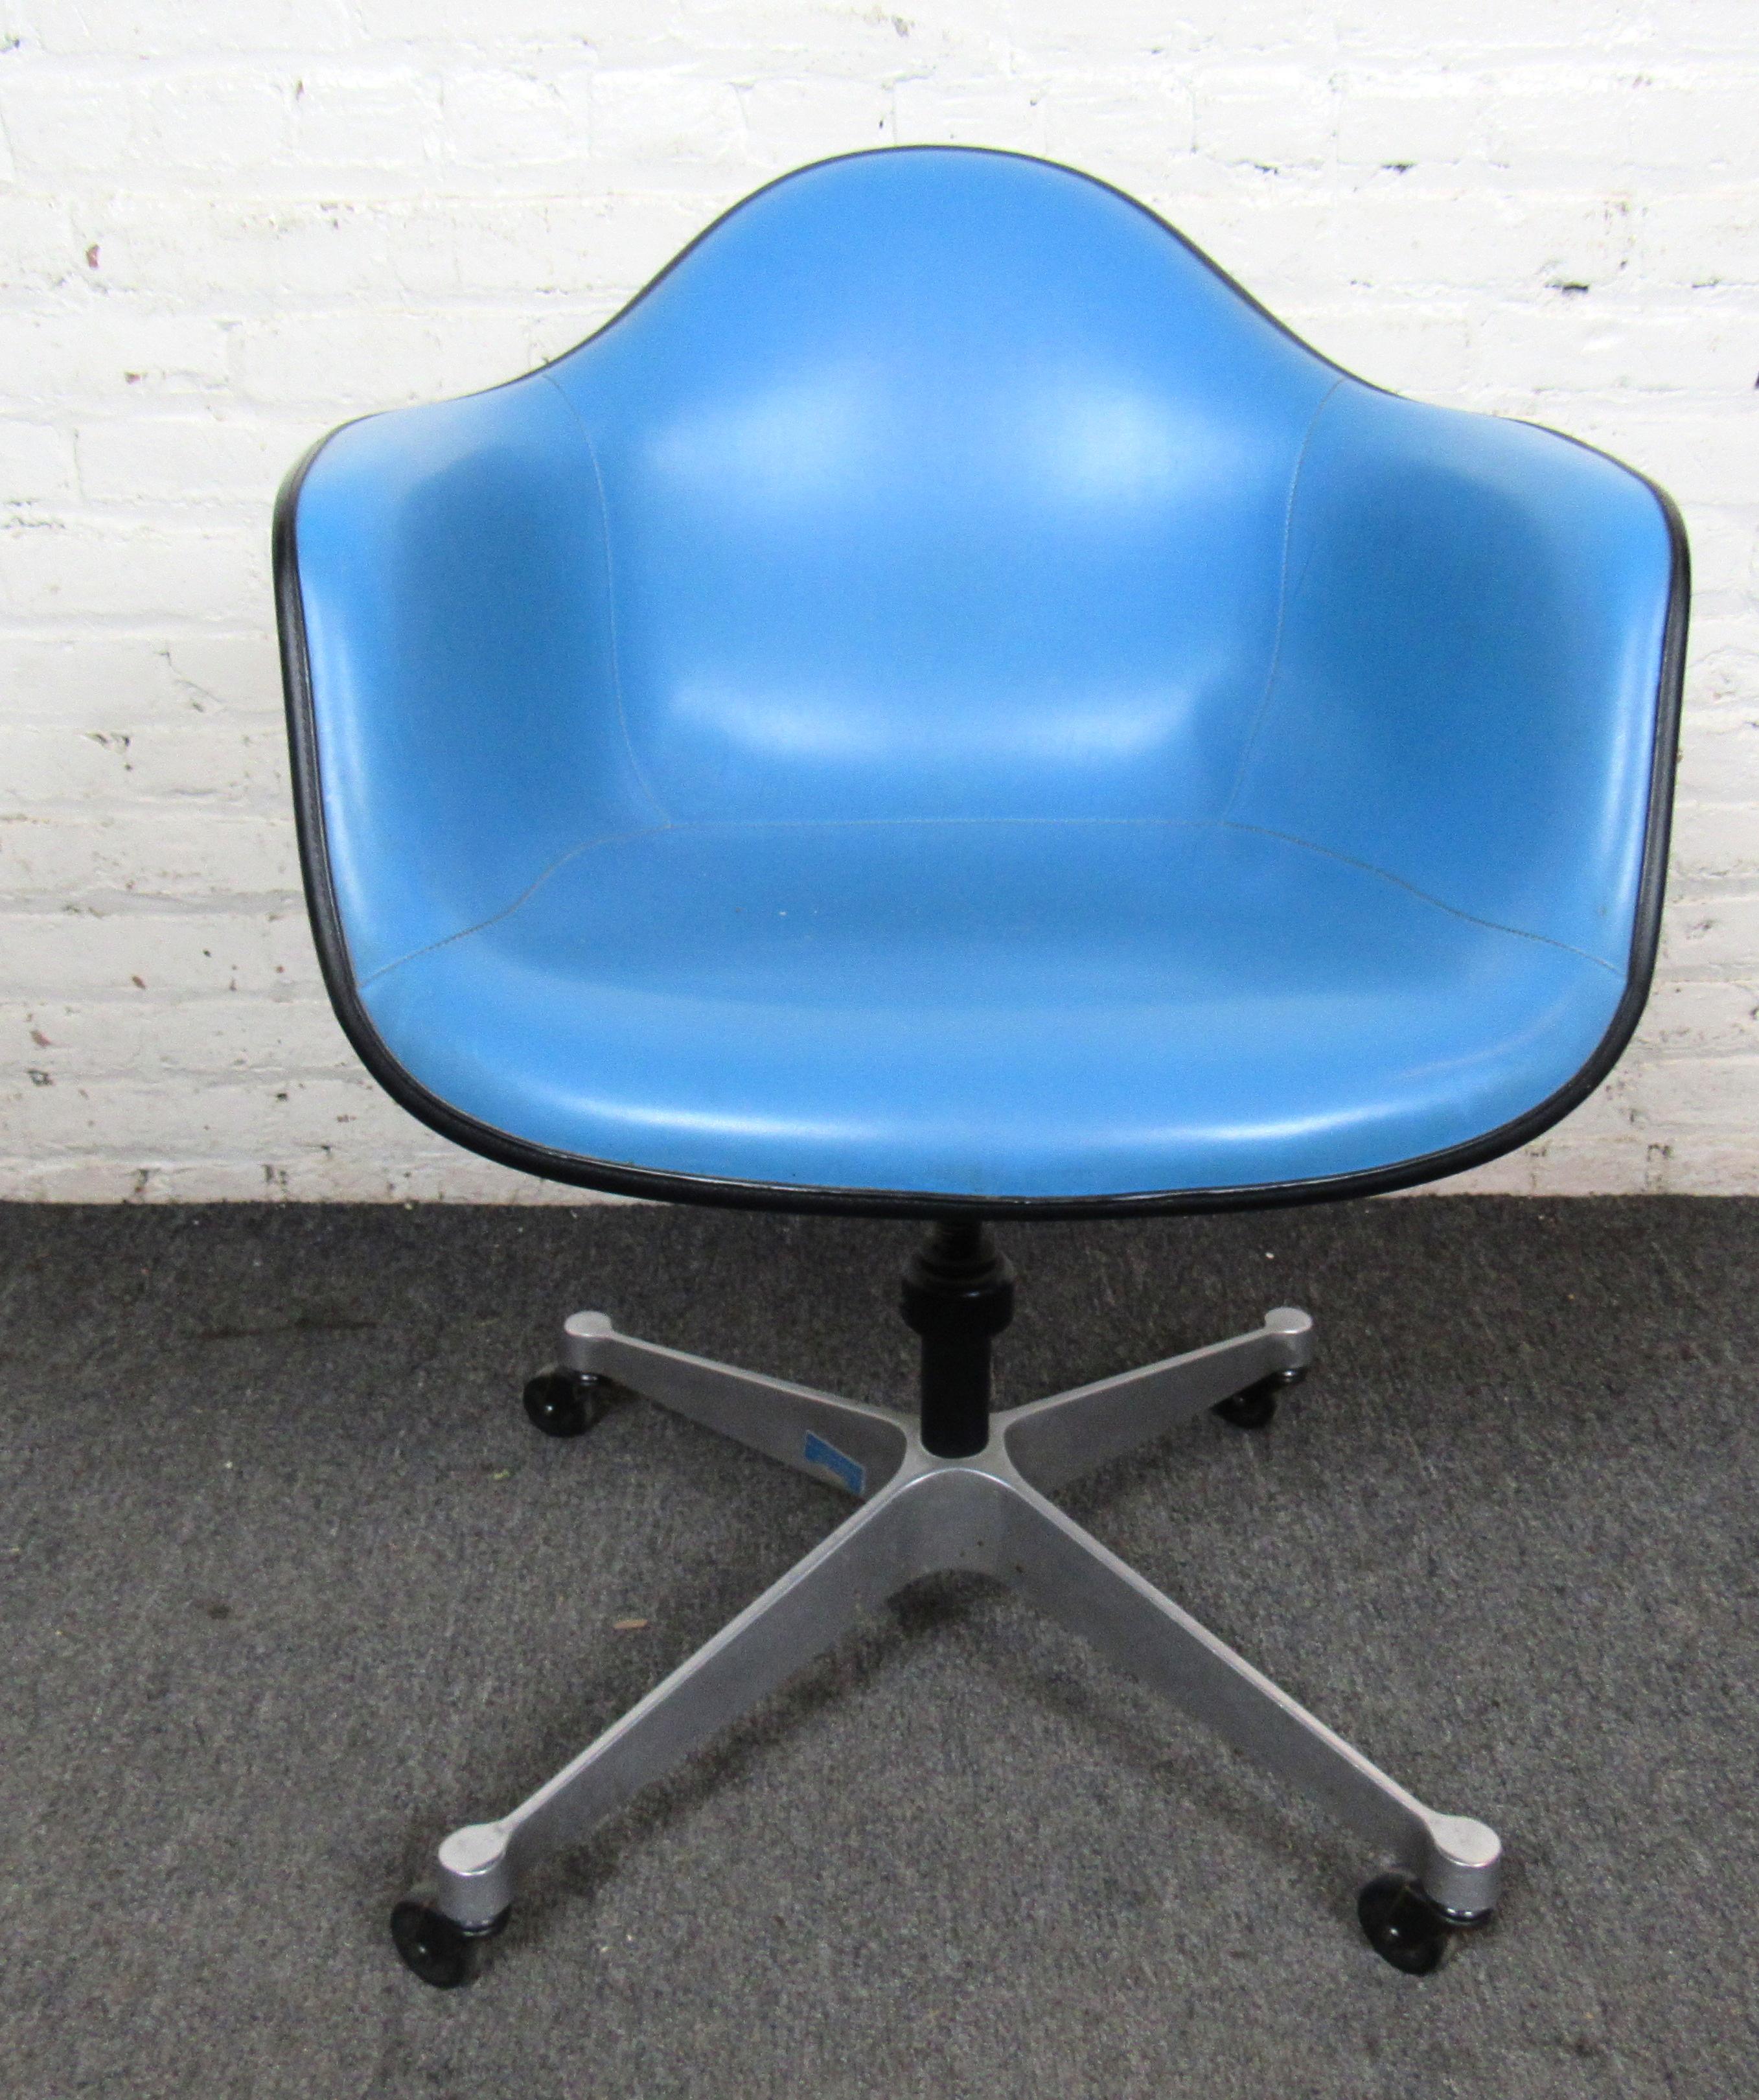 Vintage office chair by Herman Miller for Eames. Classic 